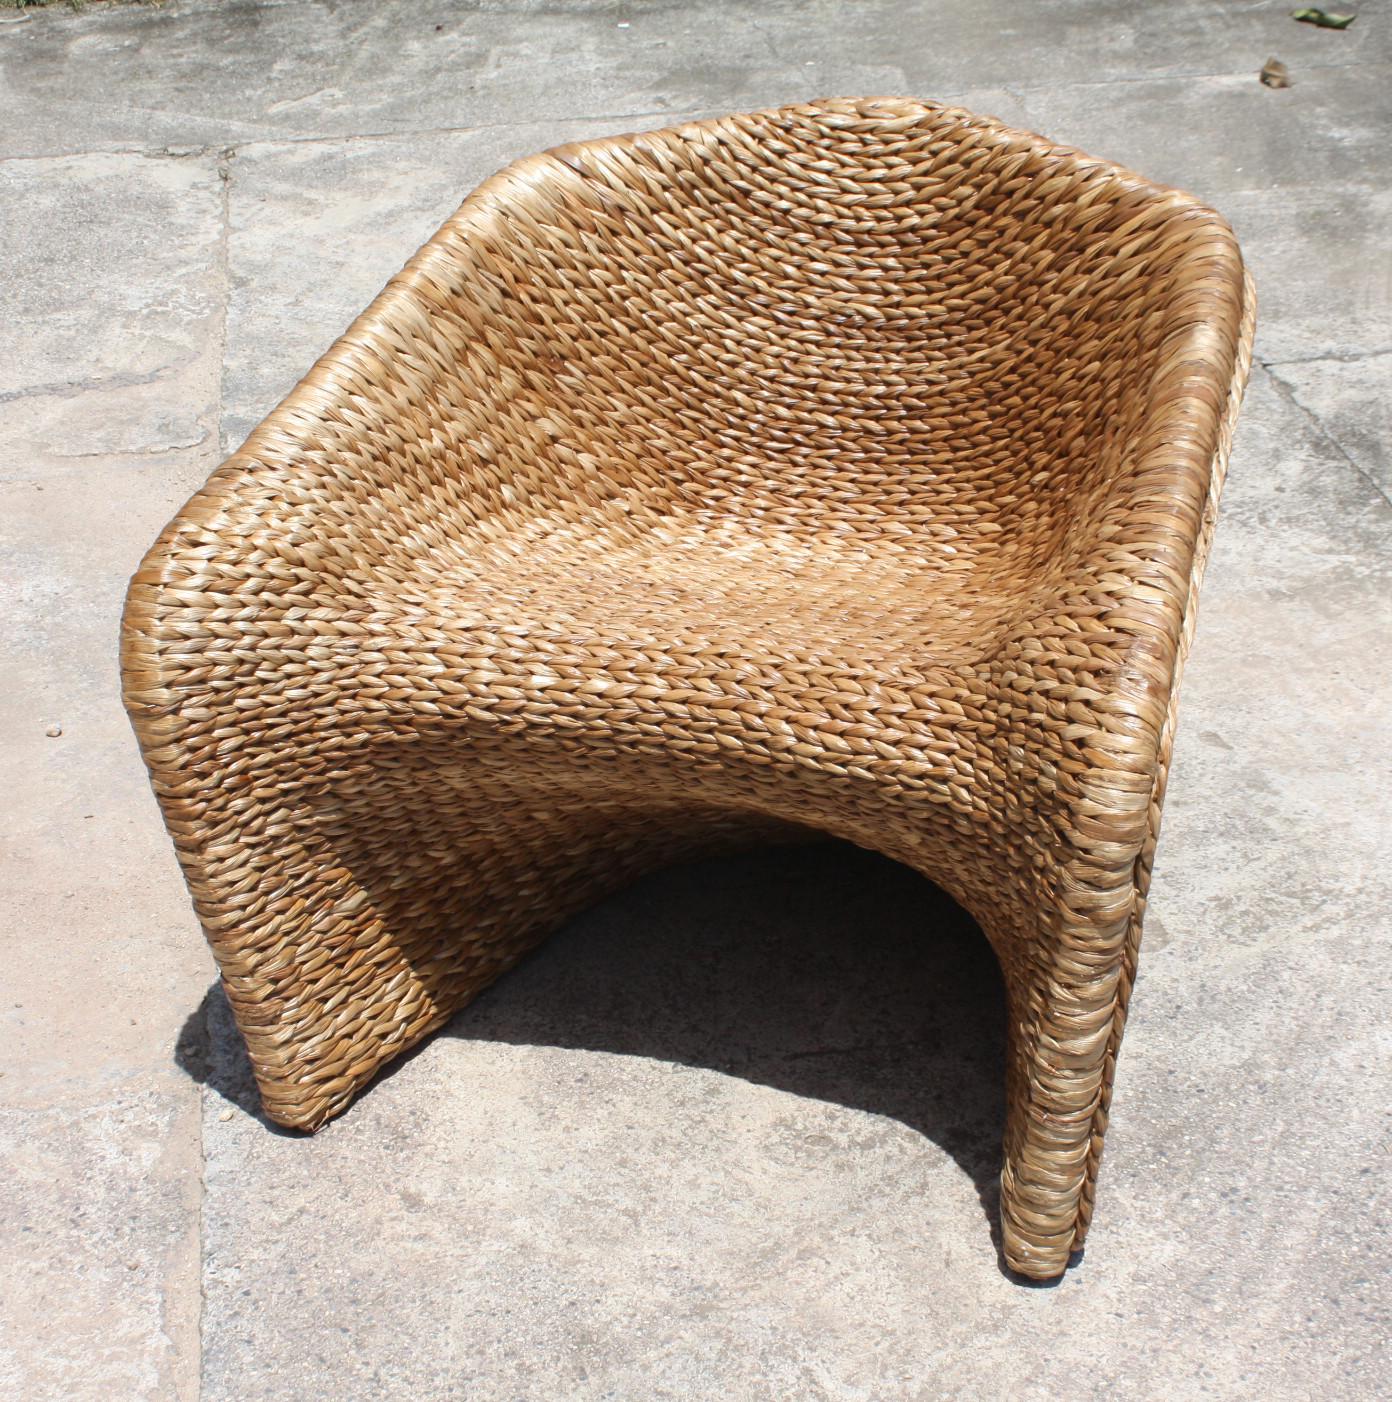 This armchair is the result of several experiences with handwoven natural fiber rush. On this armchair project we focused on exploring the in numerous possibilities of contrast and texture which only this material can provide. The piece was designed